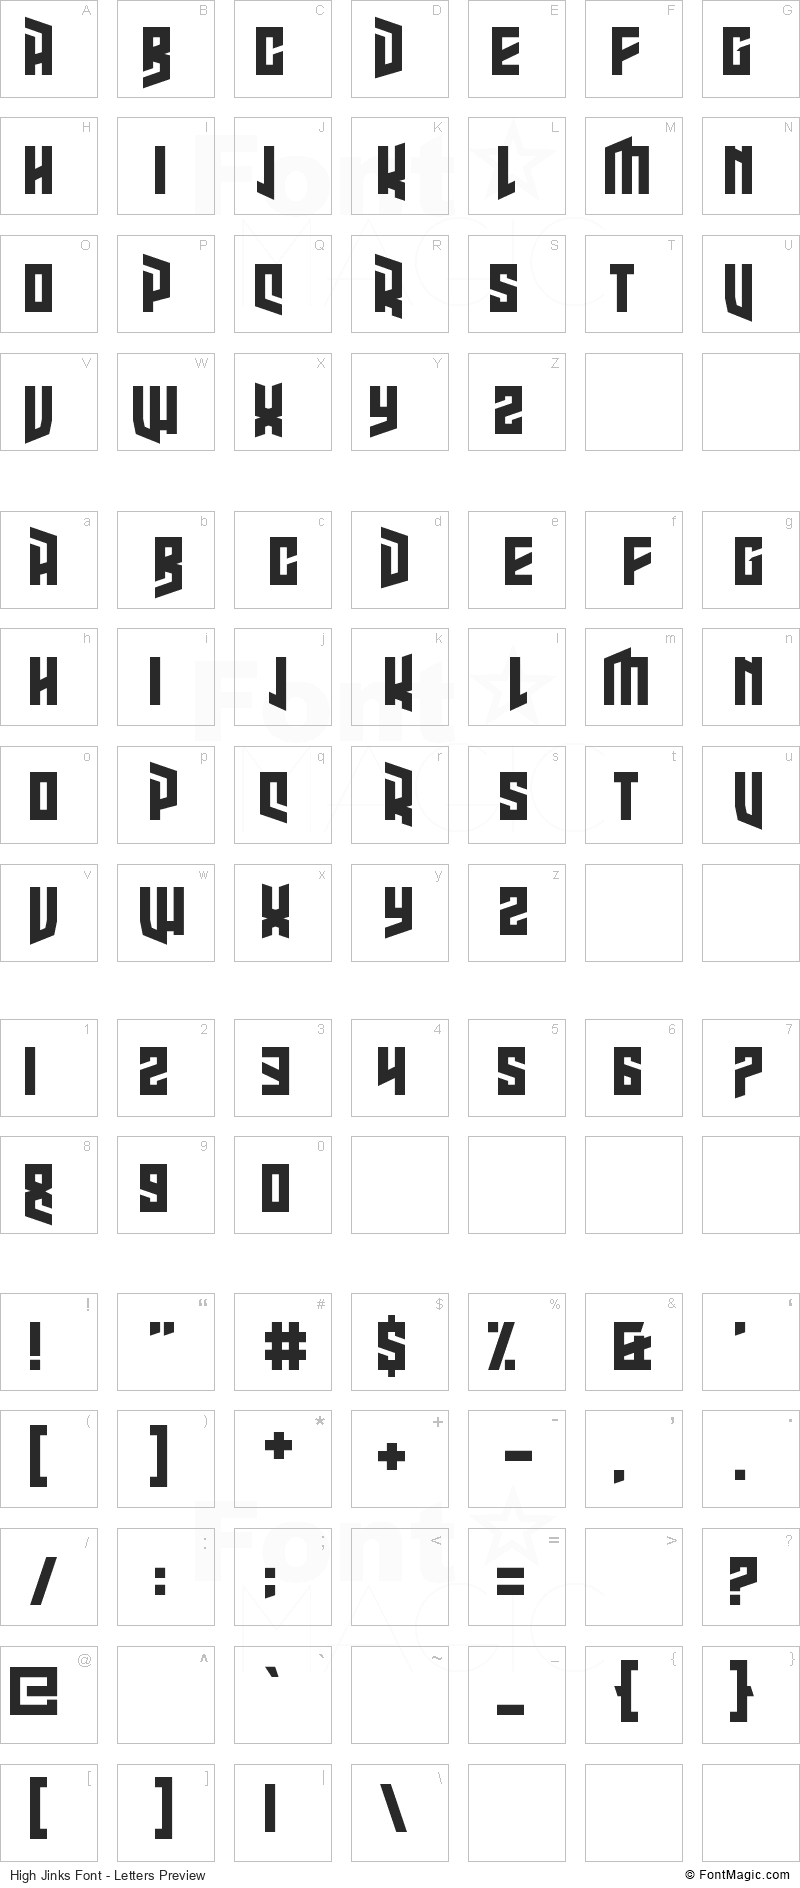 High Jinks Font - All Latters Preview Chart